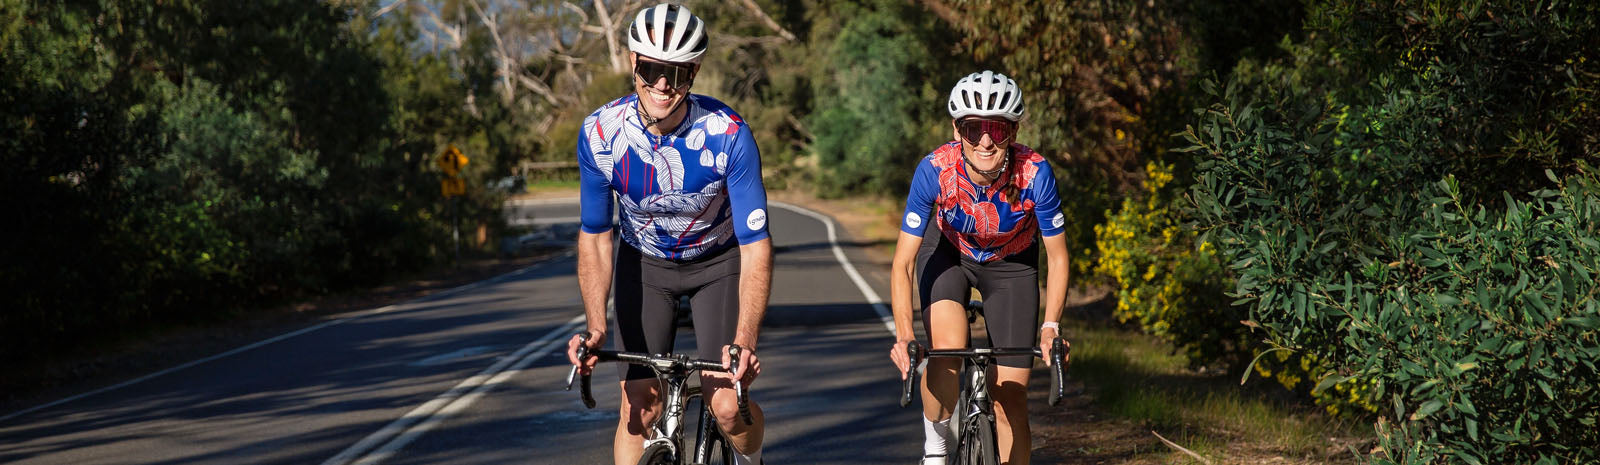 What Are The Benefits of Cycling-Specific Apparel?